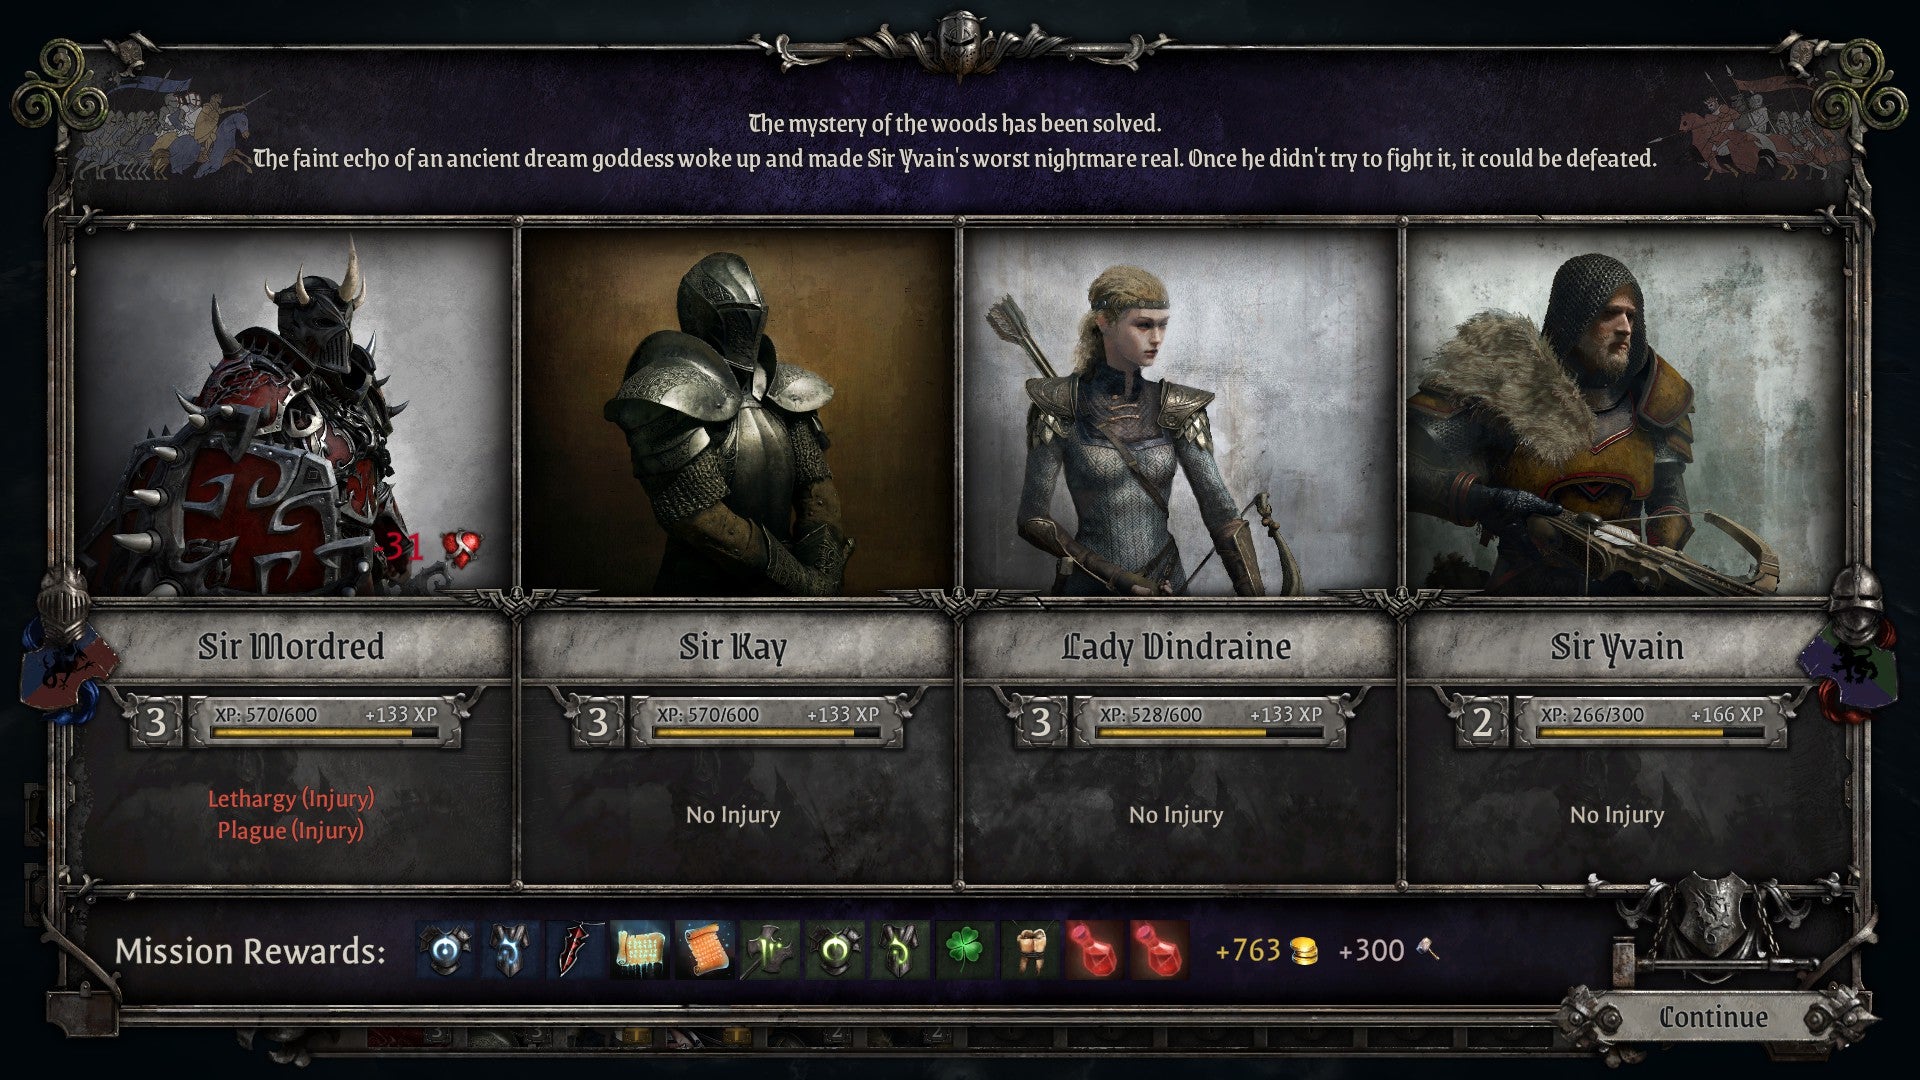 A mission debrief screen in King Arthur: Knight's Tale, showing Sir Mordred, Sir Kay, Lady Dindrane and Sir Yvaine.